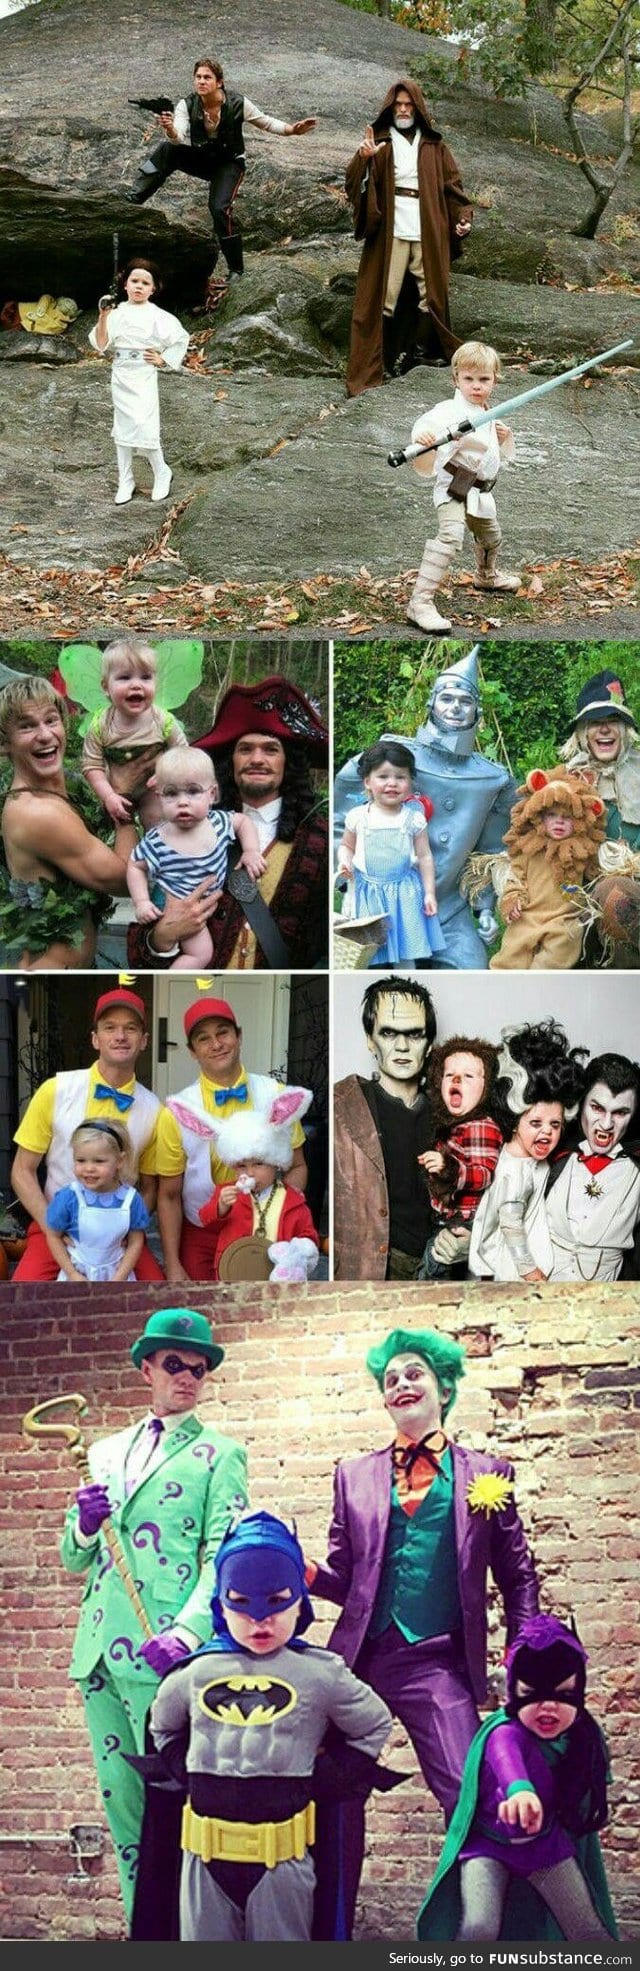 Neil Patrick Harris is really winning the family costume part